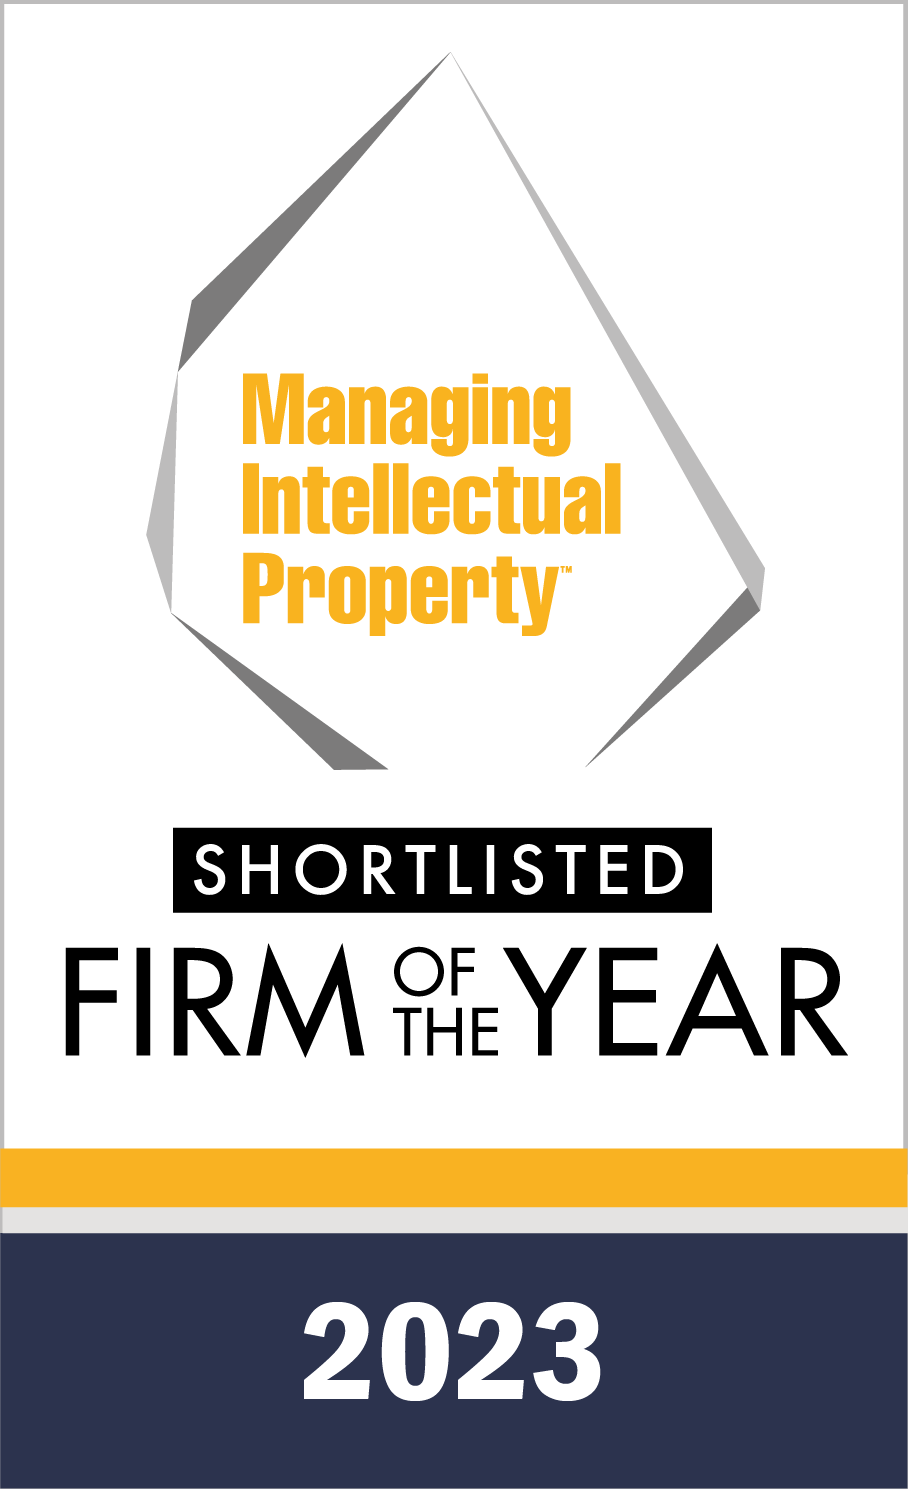 Best firm Italy intellctual property